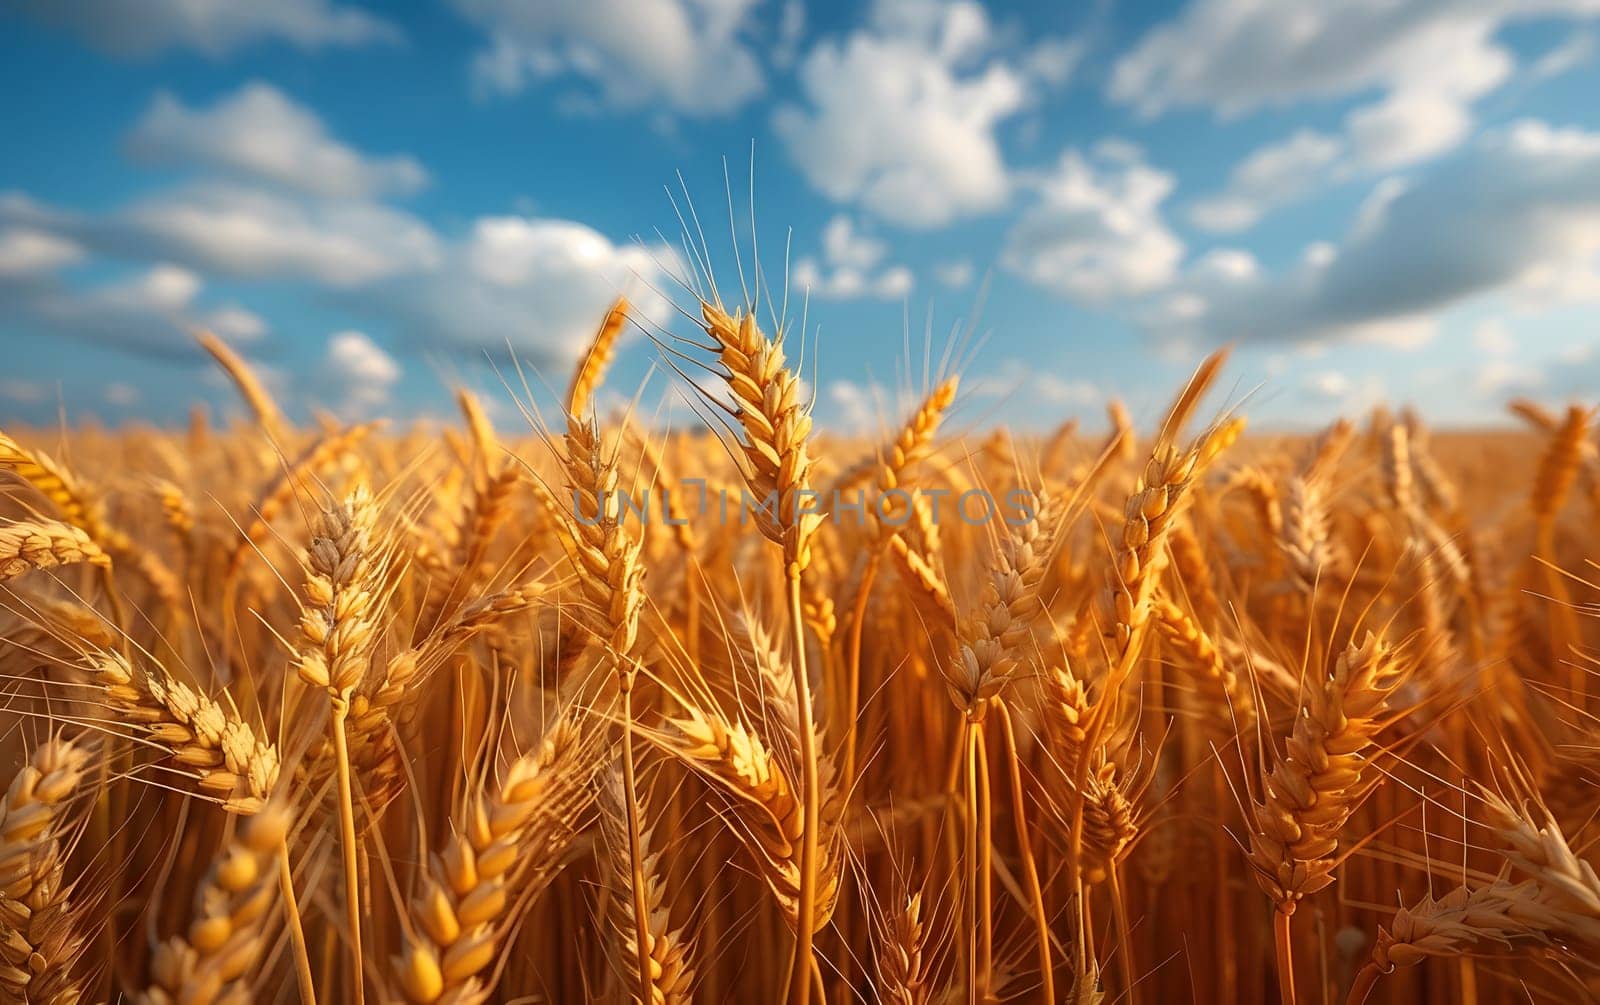 A picturesque scene of a vast field of Khorasan wheat with a clear blue sky and fluffy clouds in the background, showcasing the beauty of agriculture and nature